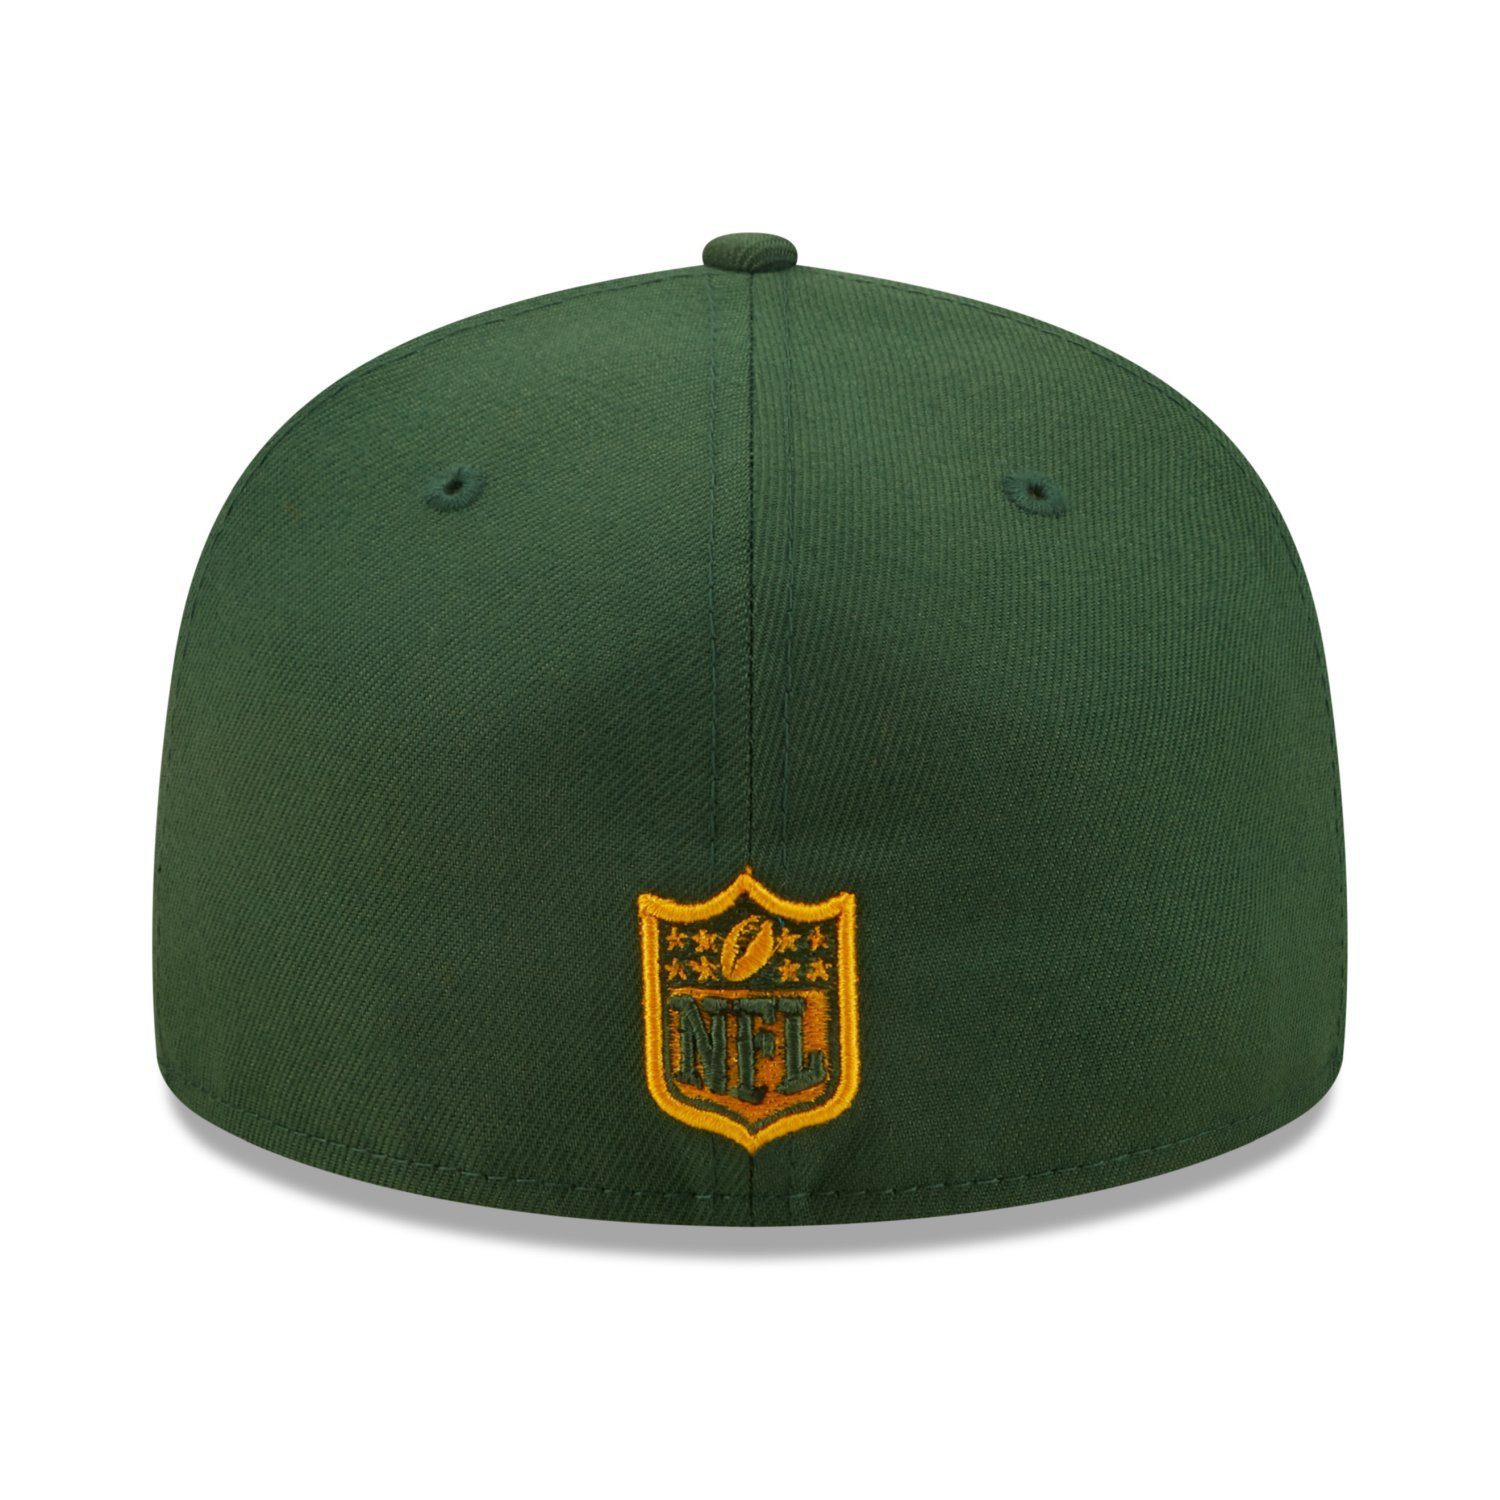 Era 59Fifty Fitted Cap New Green GROOVY Packers Bay